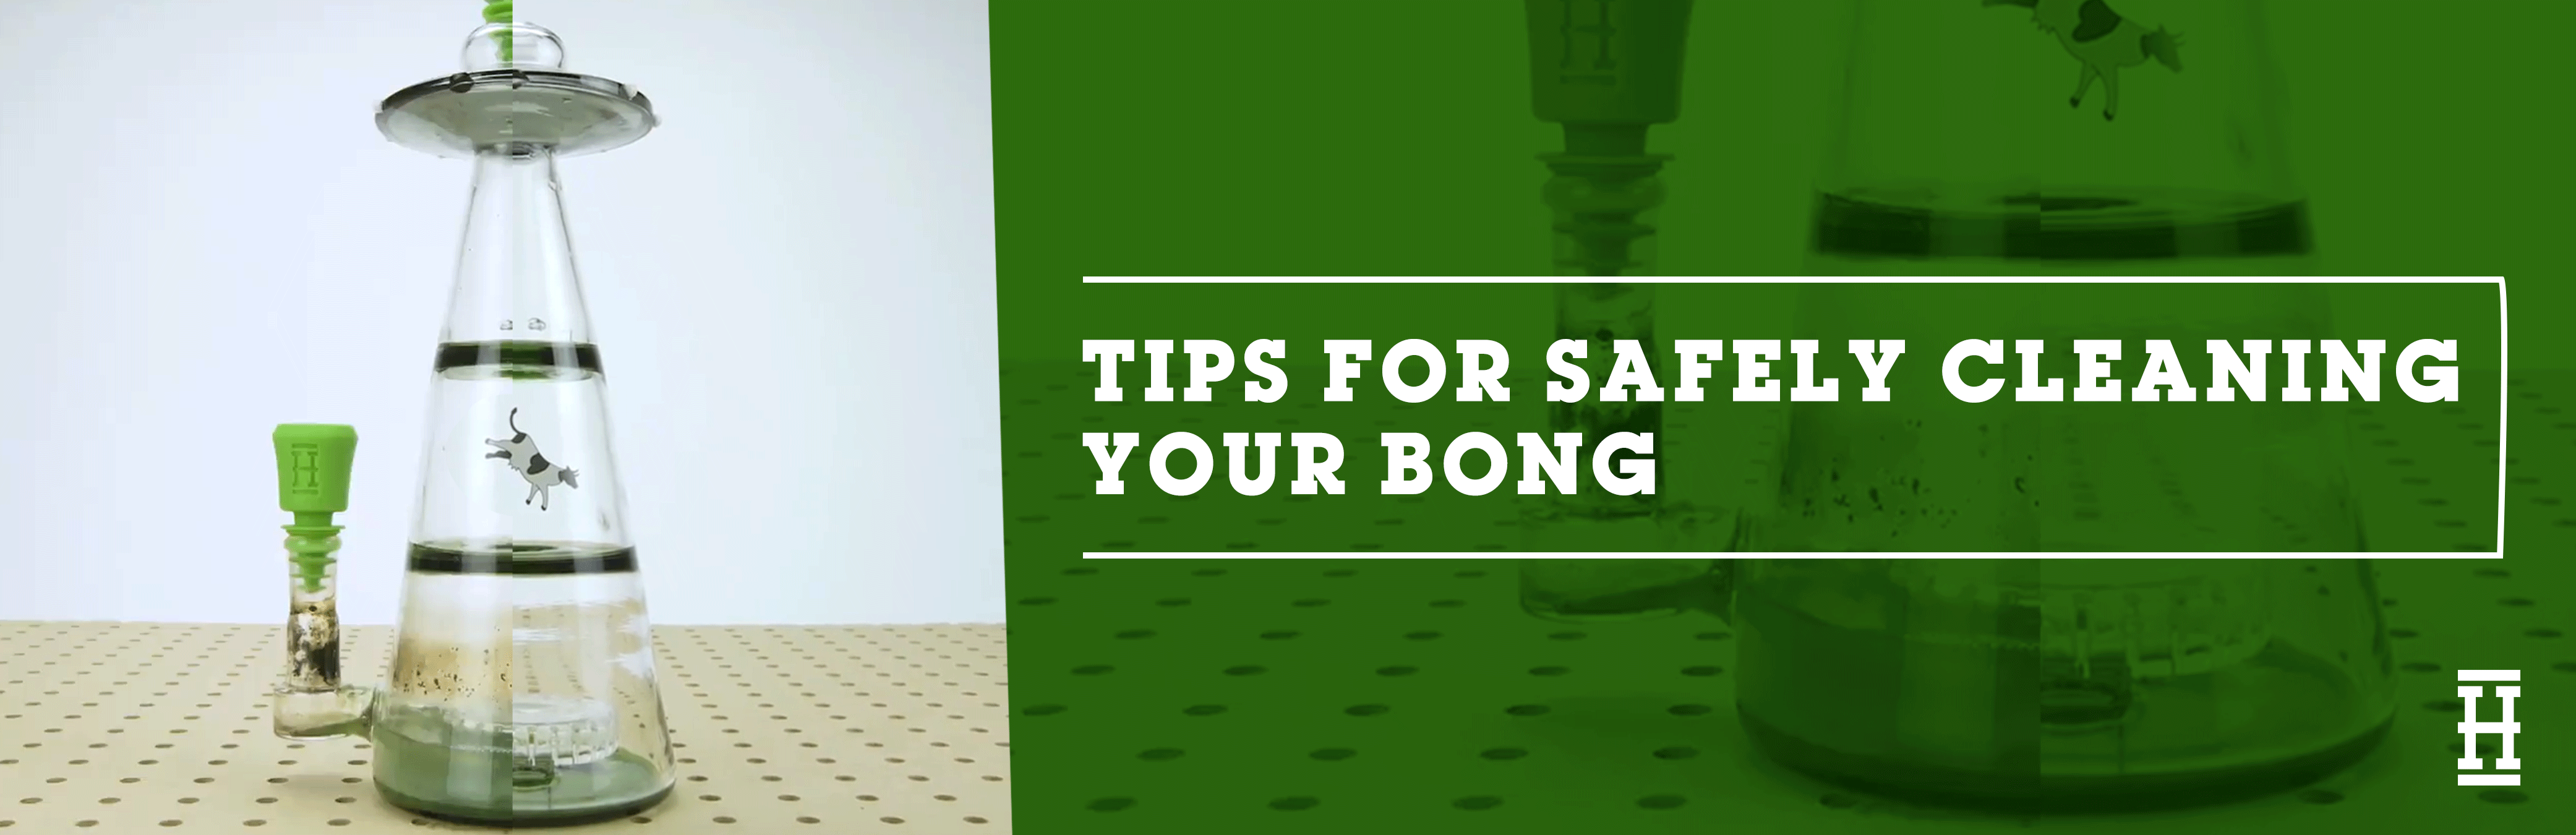 Bong Cleaning Service - Glass Bong and Pipe Cleaning Services